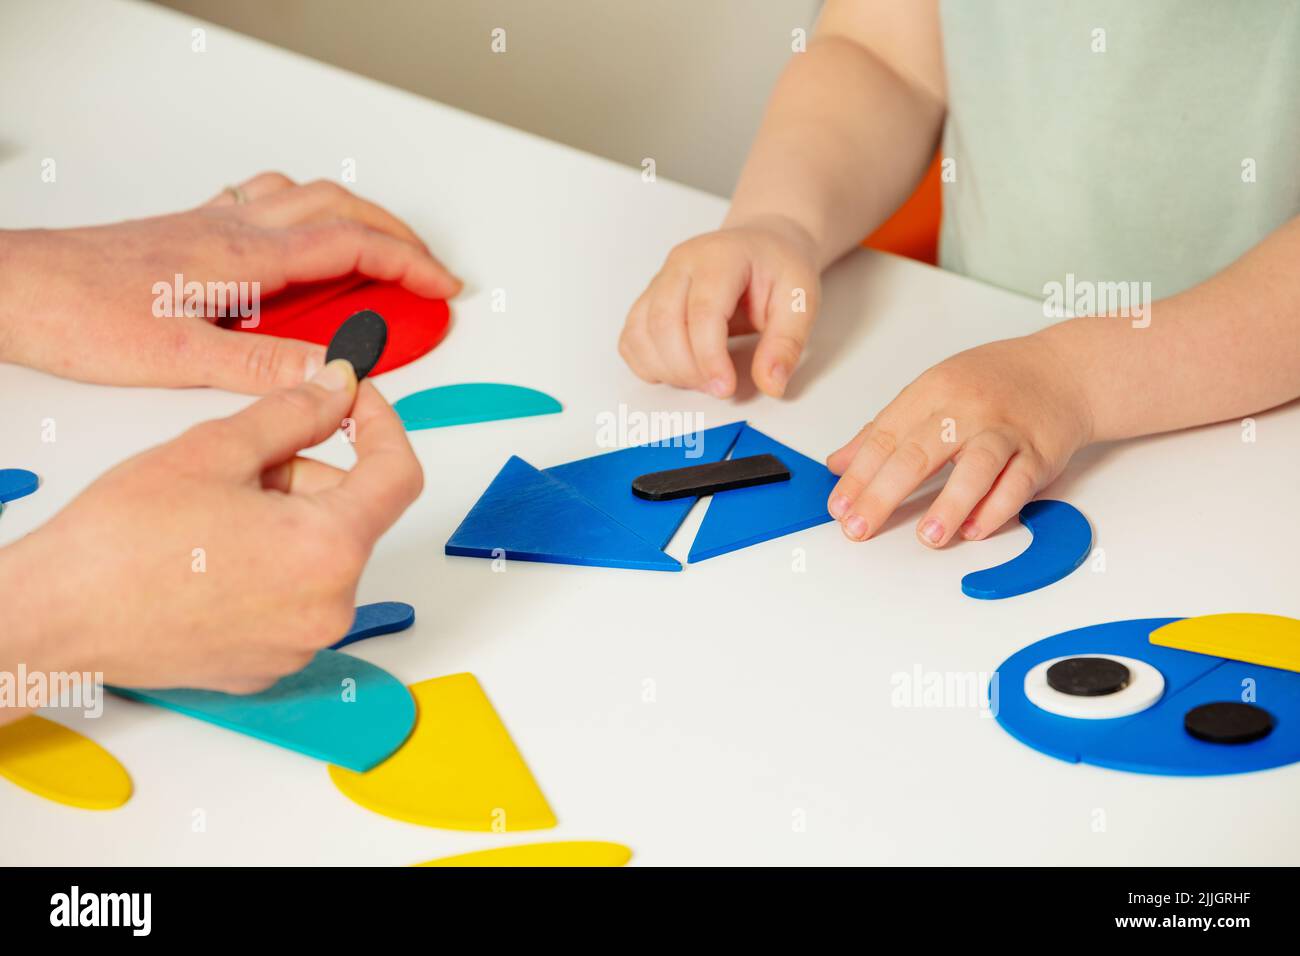 Girl child's hand put together shapes to create a house Stock Photo